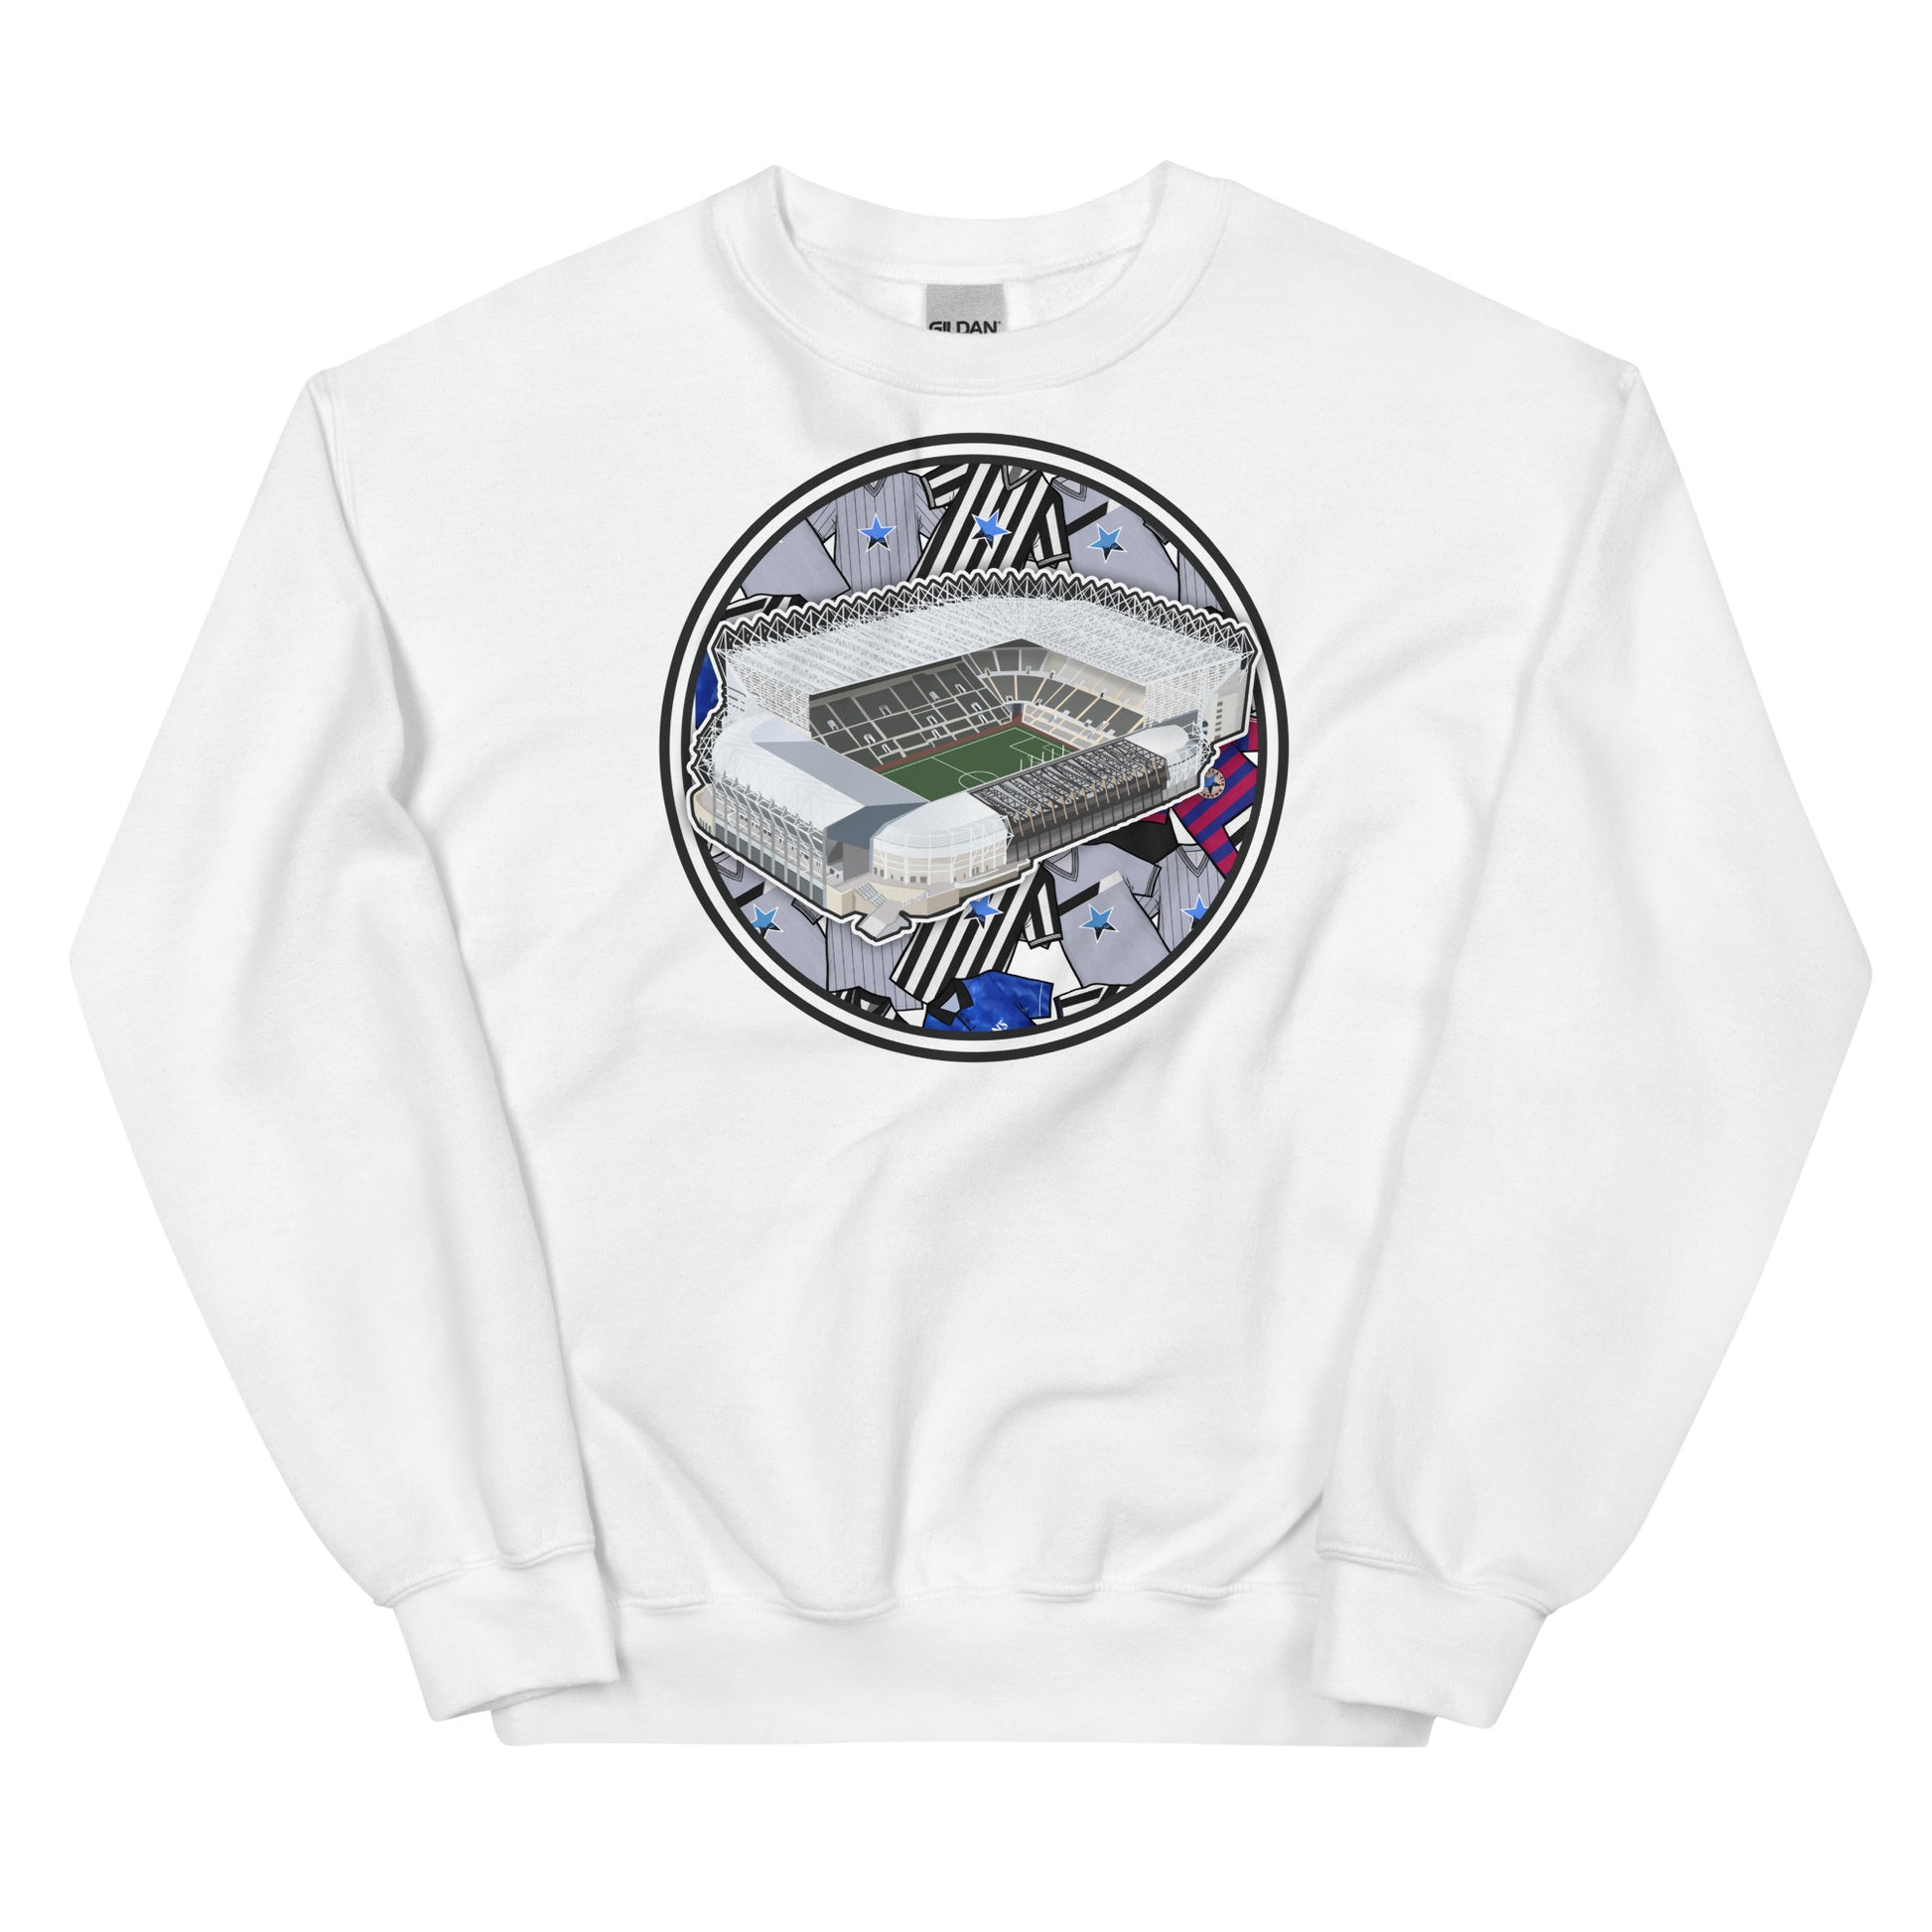 White unisex sweatshirt jumper Inspired by the home of Newcastle United, St James' Park in Tyneside.